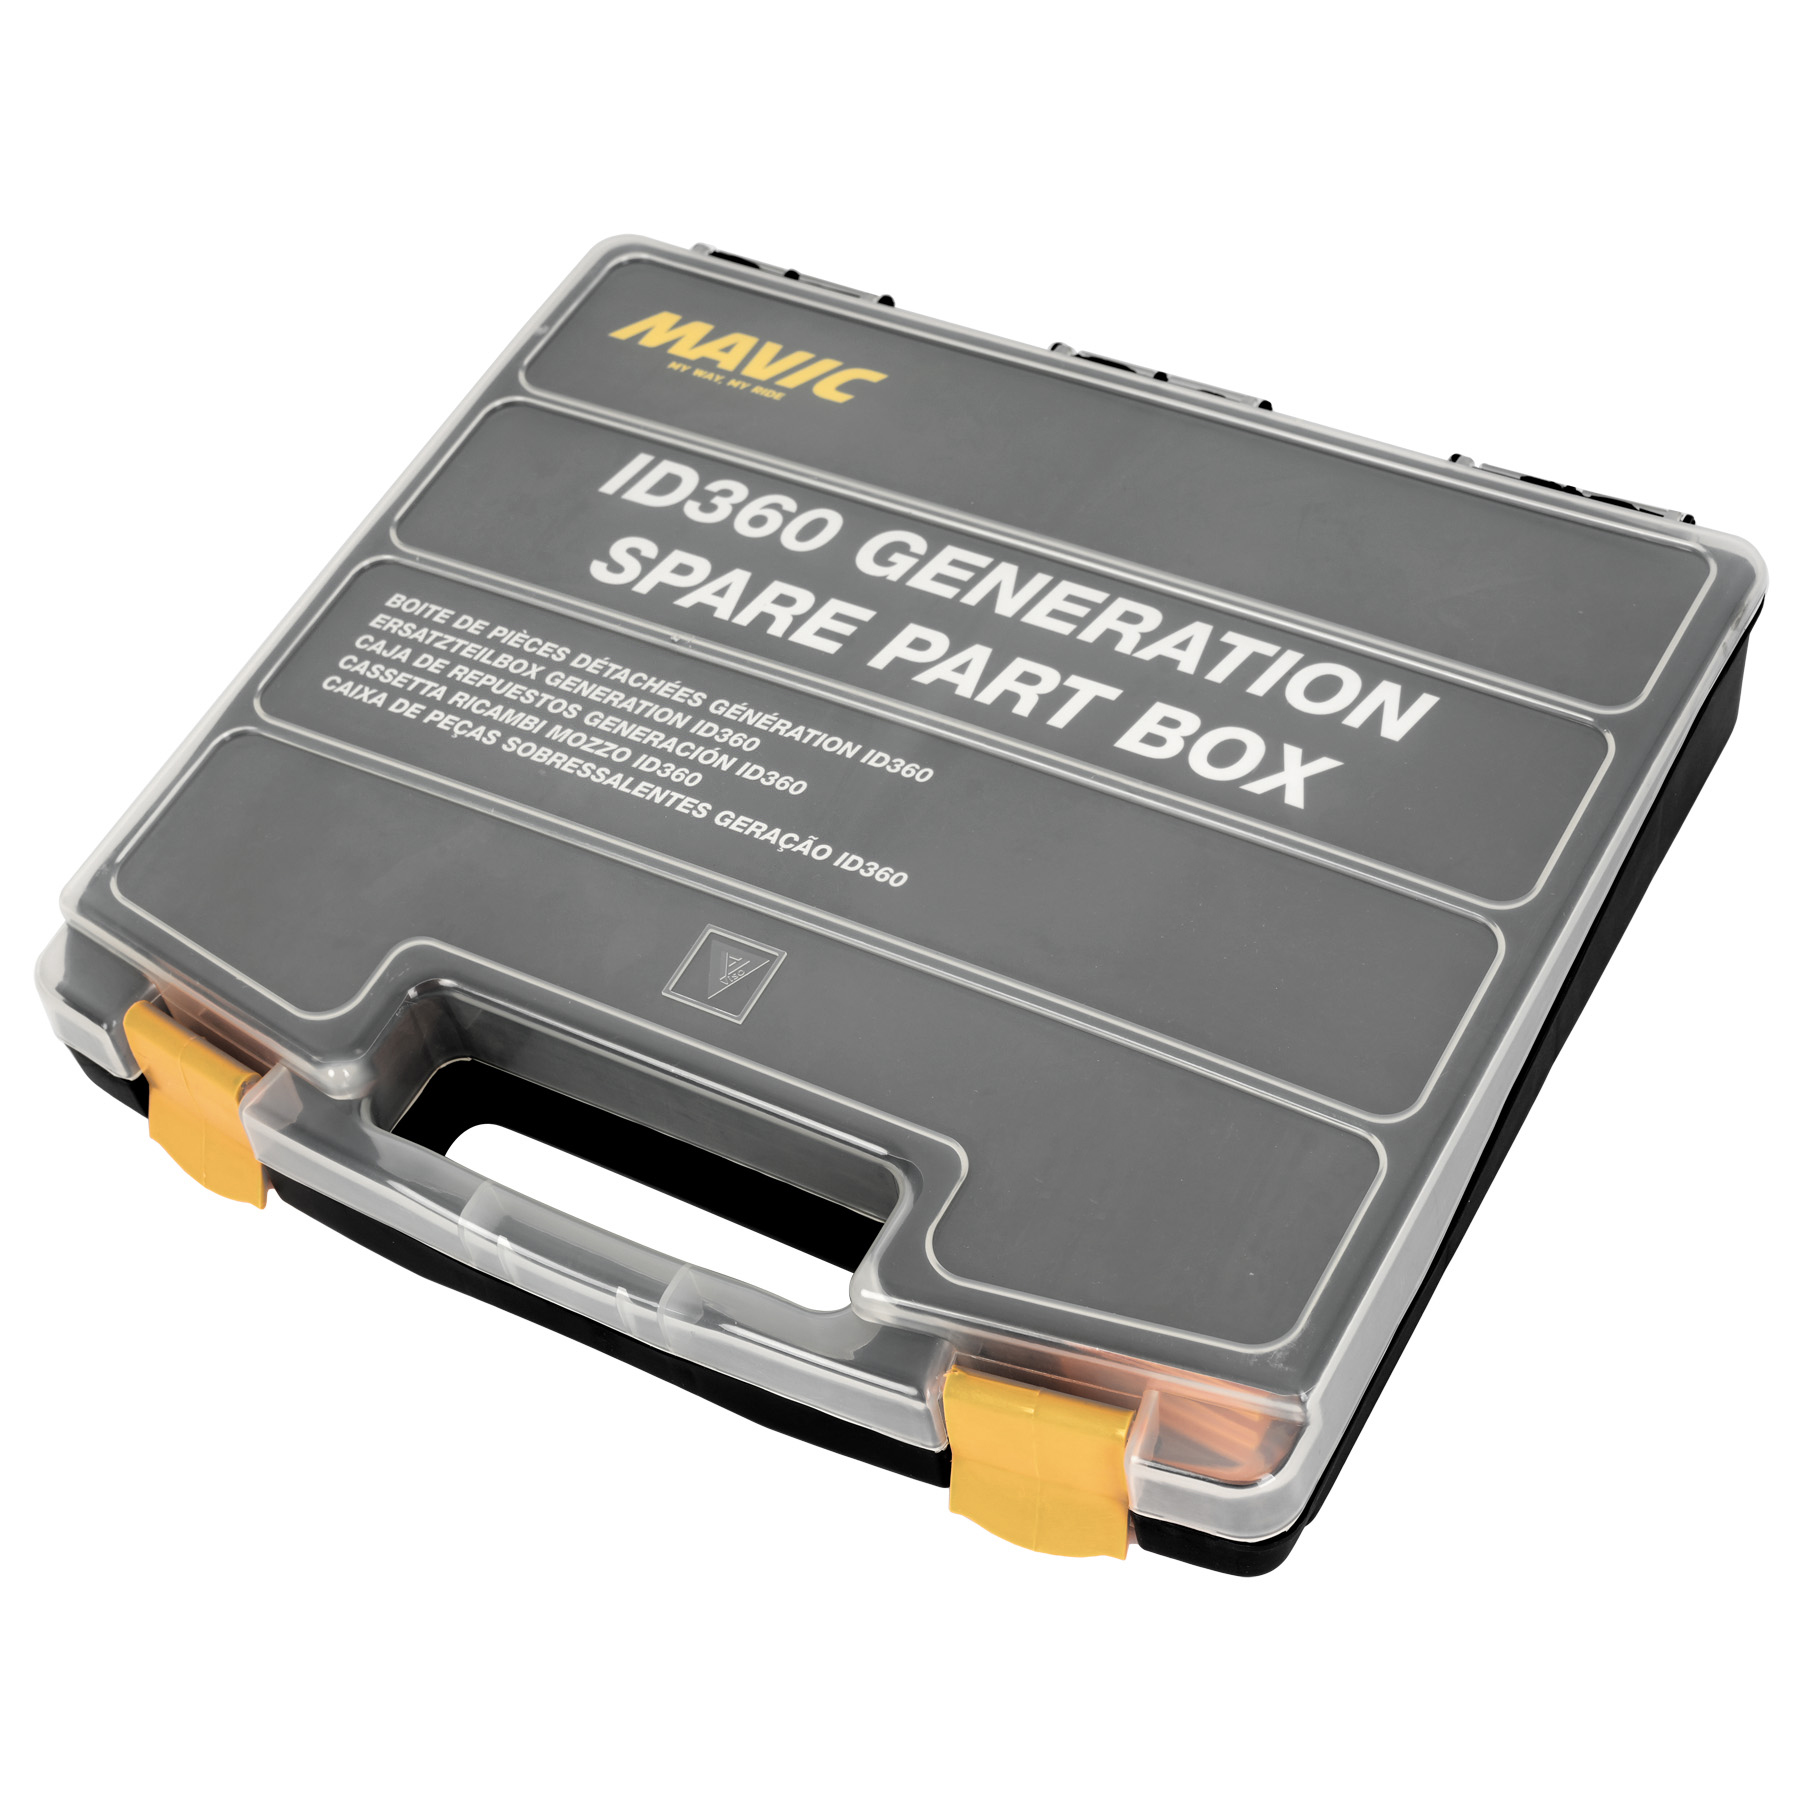 Picture of Mavic Spare Part Box for ID360 generation hubs - V00084331